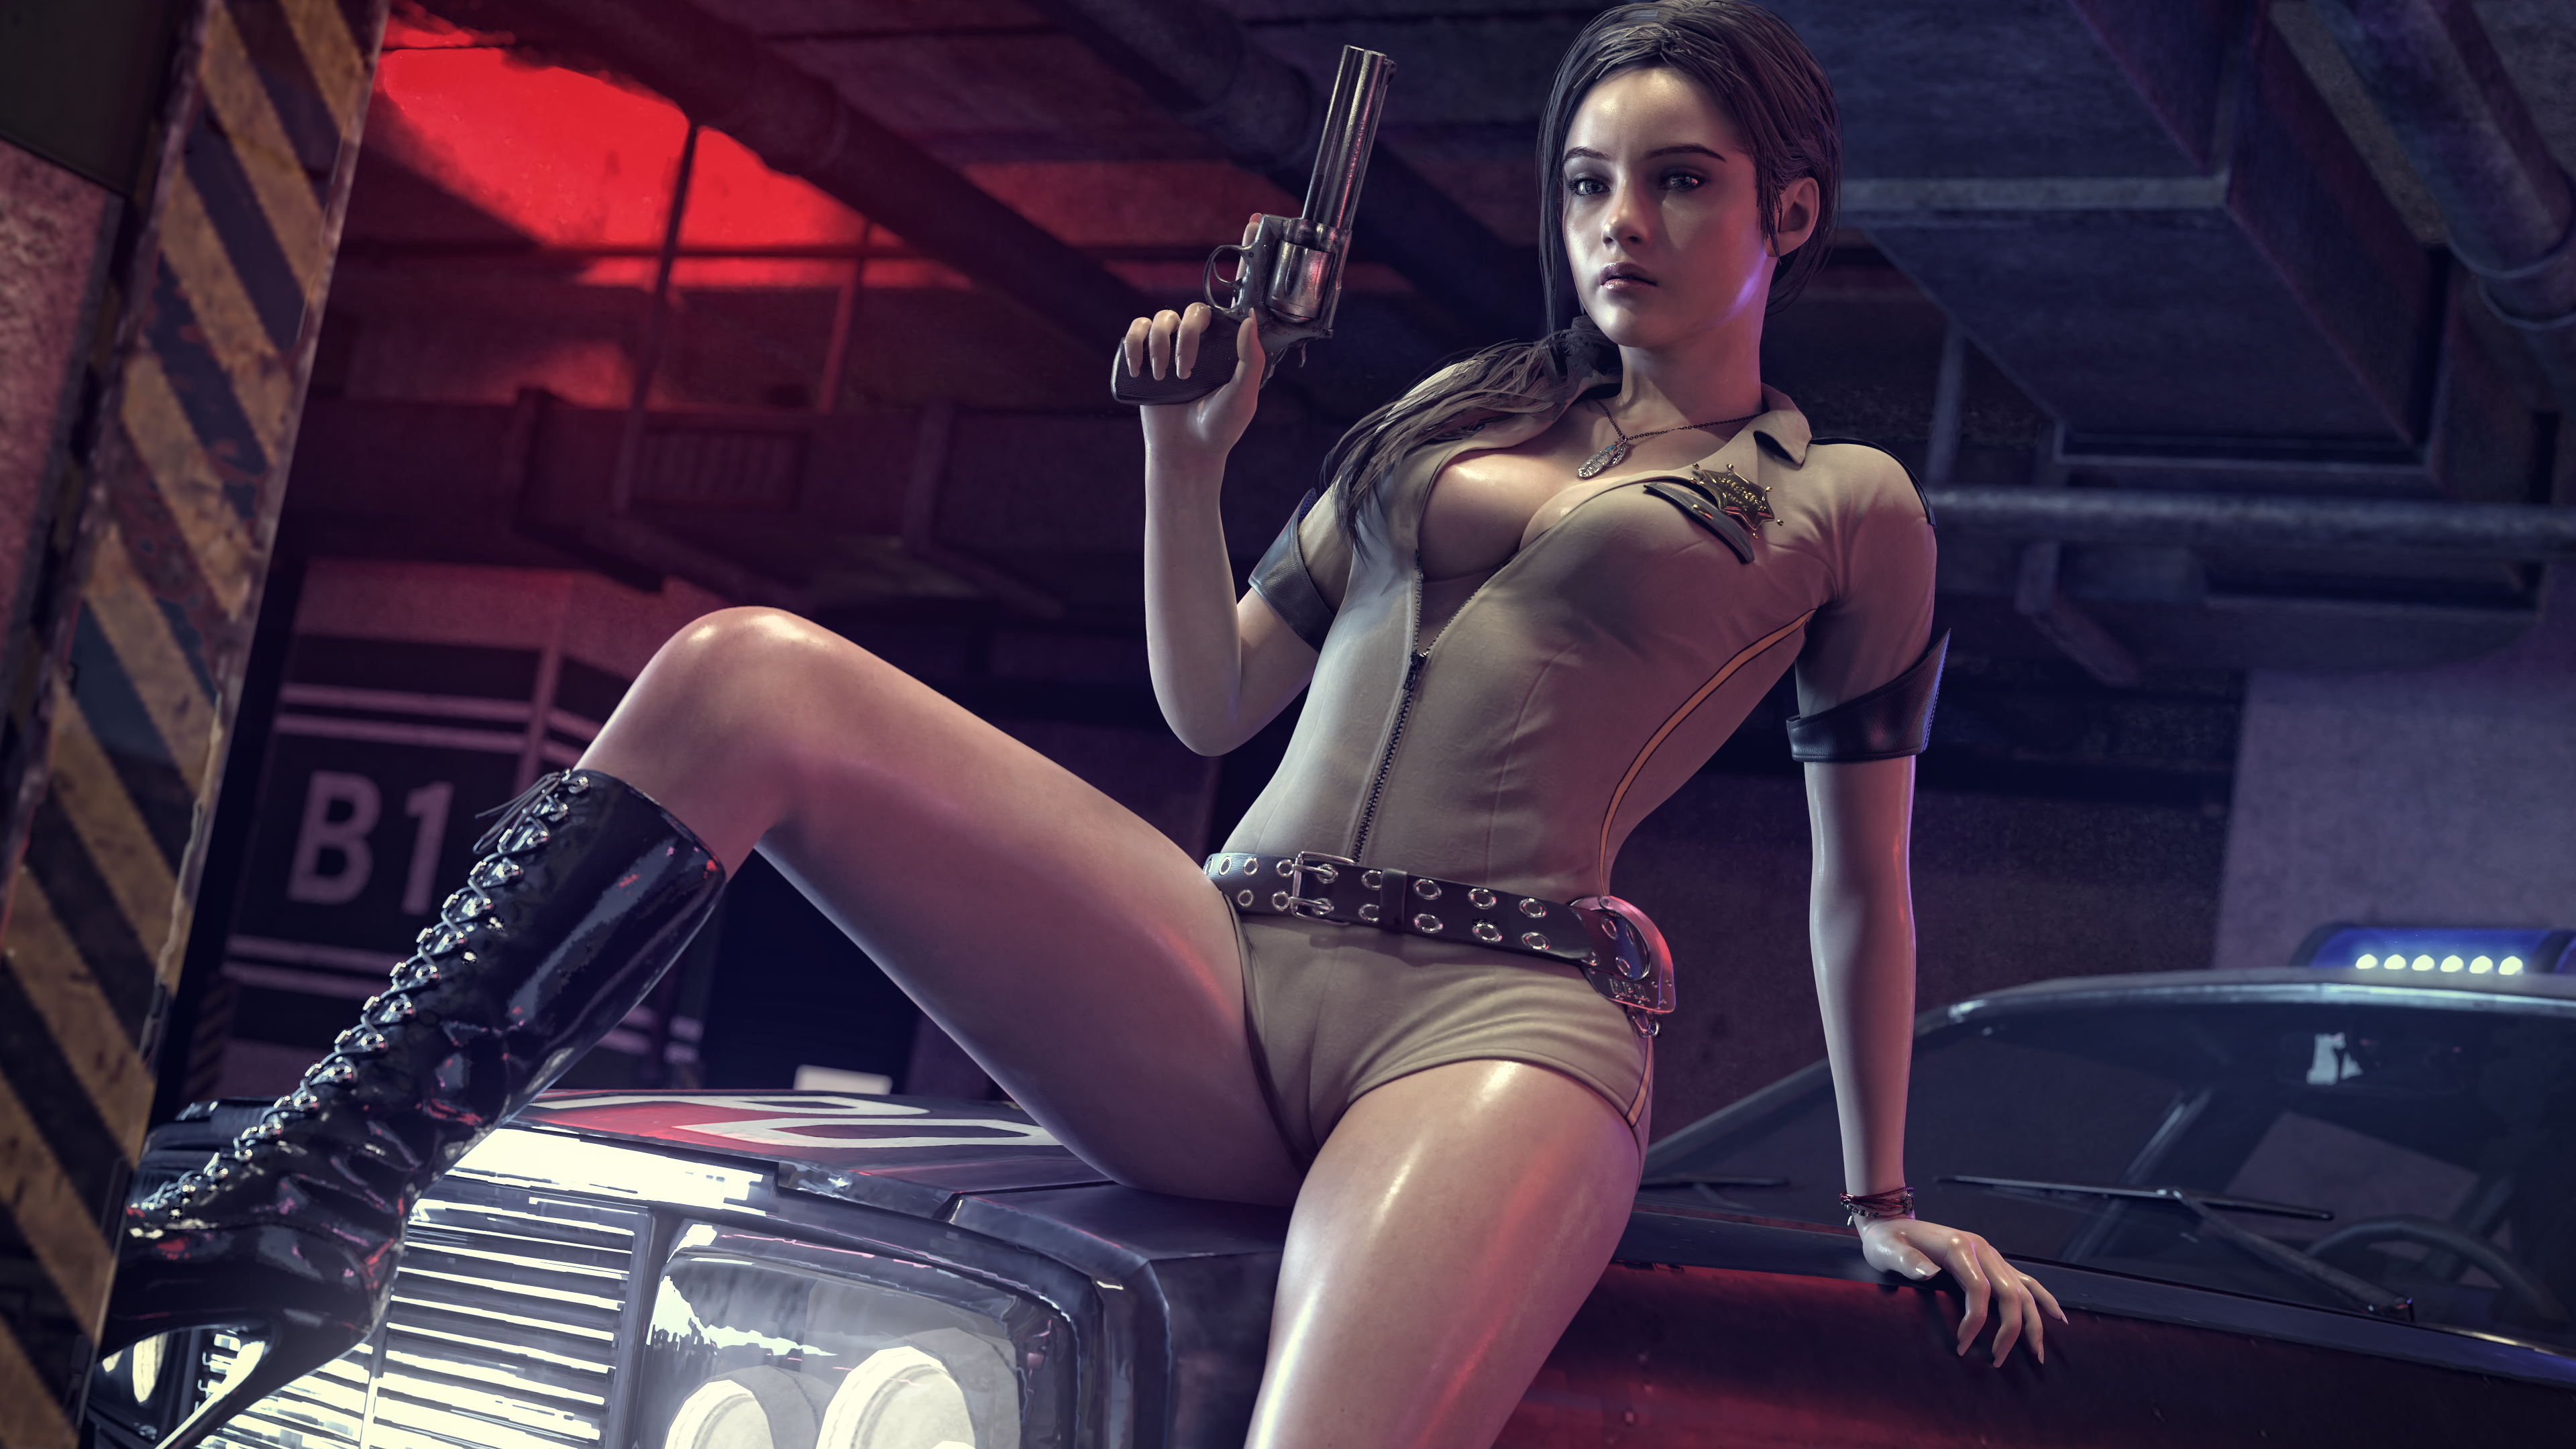 General 3840x2160 Claire Redfield Resident Evil video games video game girls brunette ponytail sheriff weapon car women with cars looking at viewer parted lips cleavage no bra playsuit belt cameltoe high heeled boots artwork digital art CGI fan art HydraFXX police women sitting